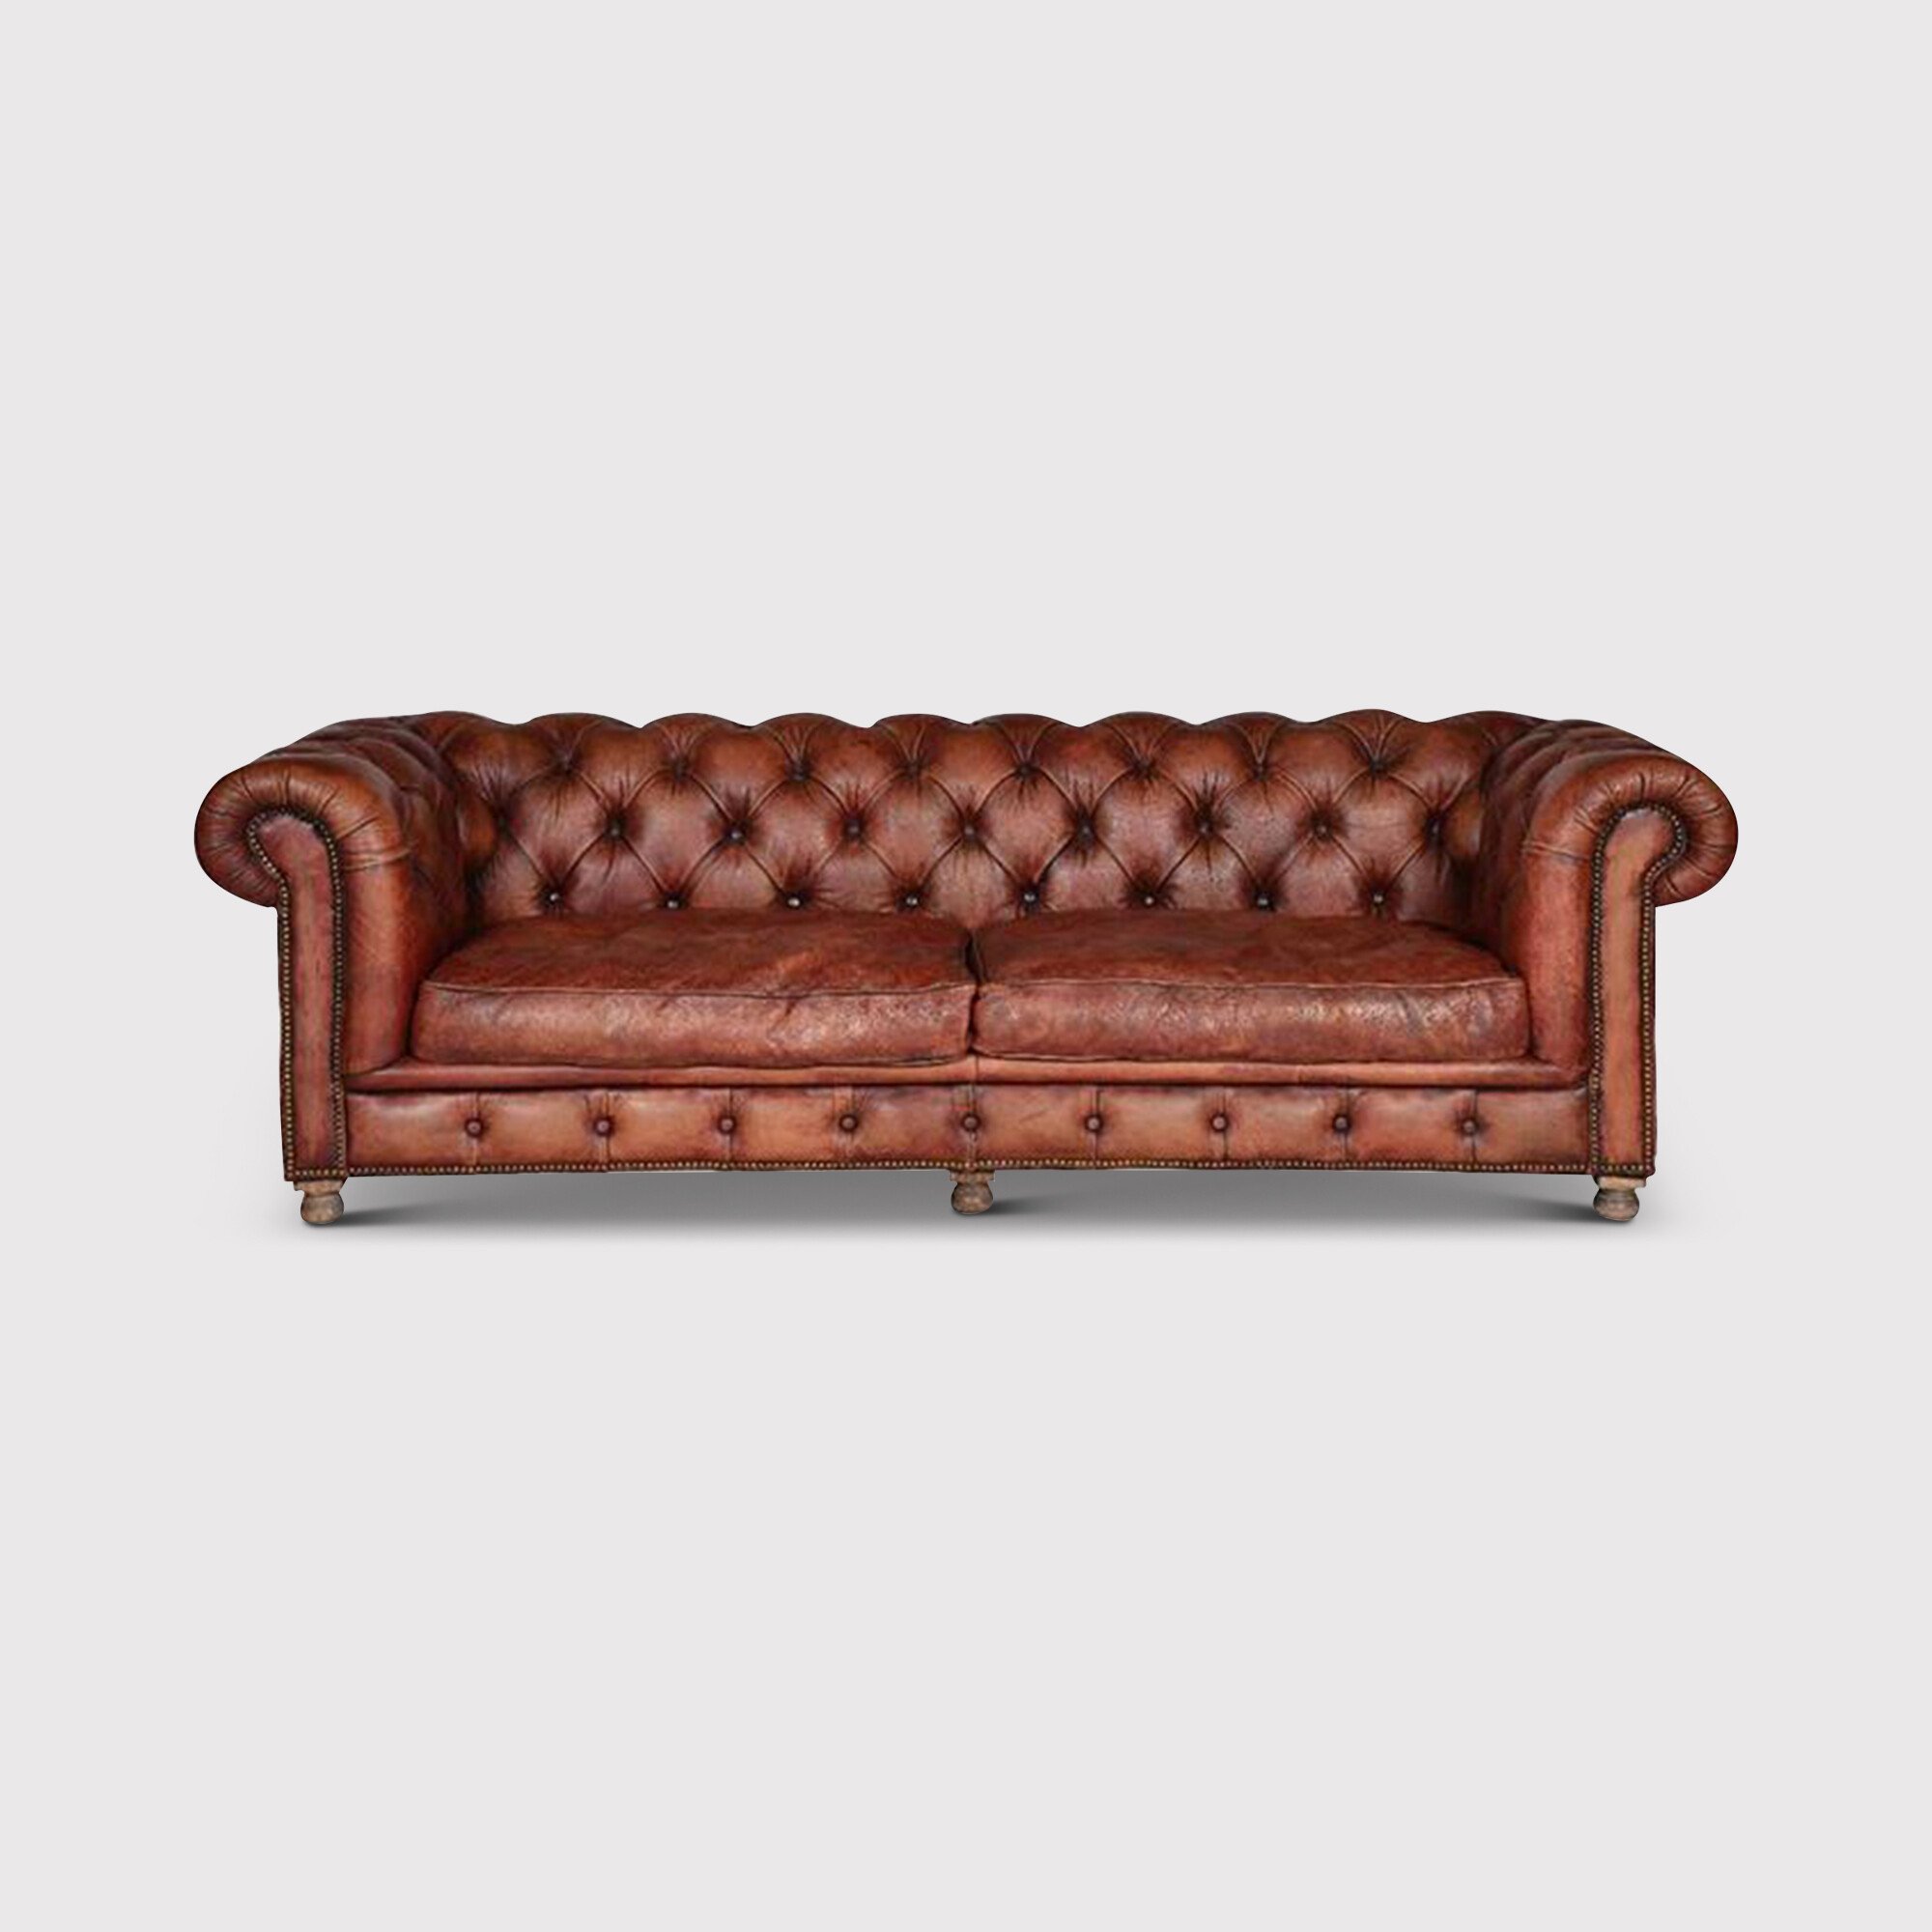 Timothy Oulton Westminster Feather Chesterfield Sofa 3 Seater, Red Leather | Barker & Stonehouse